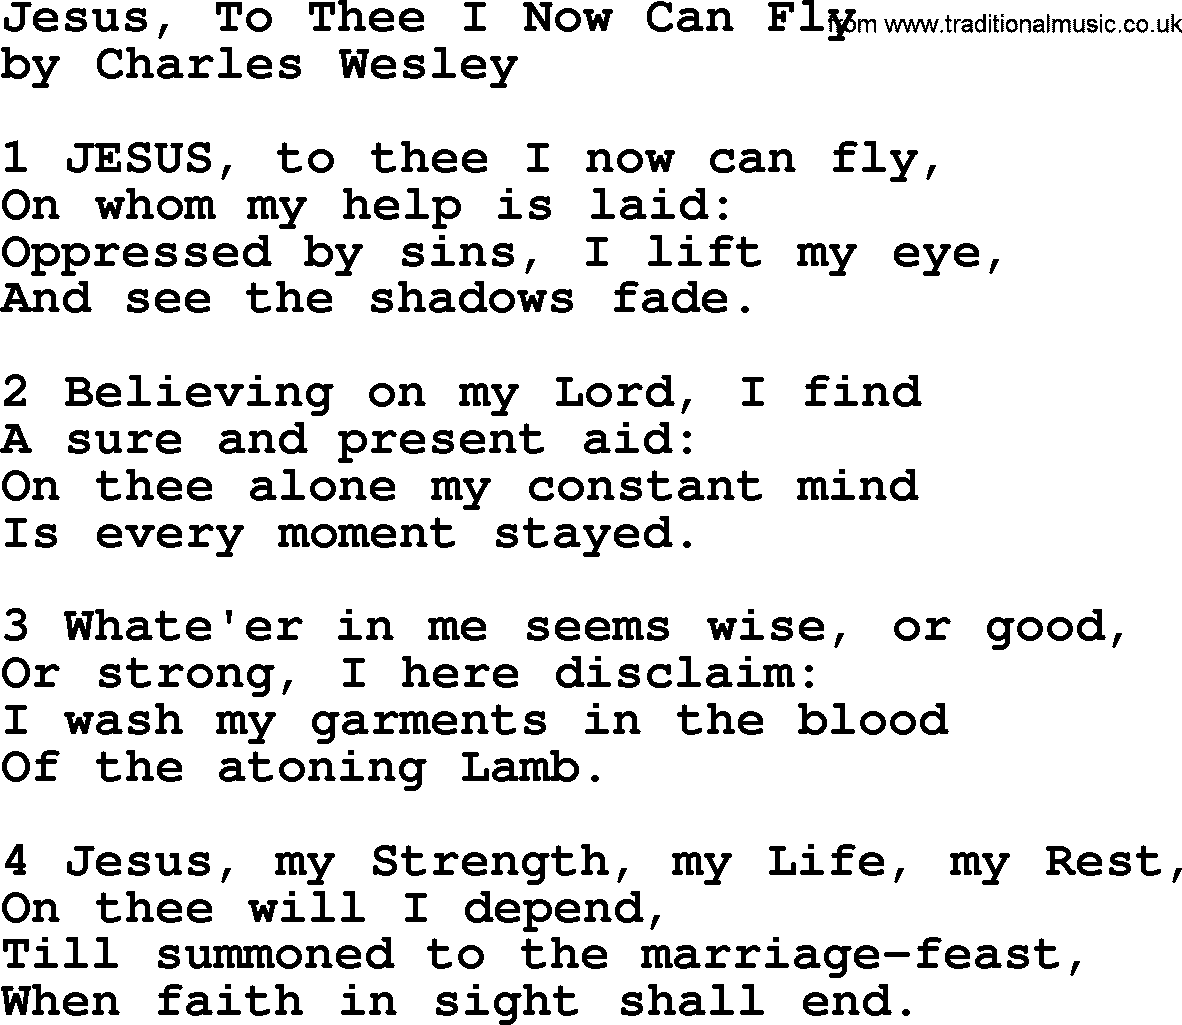 Charles Wesley hymn: Jesus, To Thee I Now Can Fly, lyrics